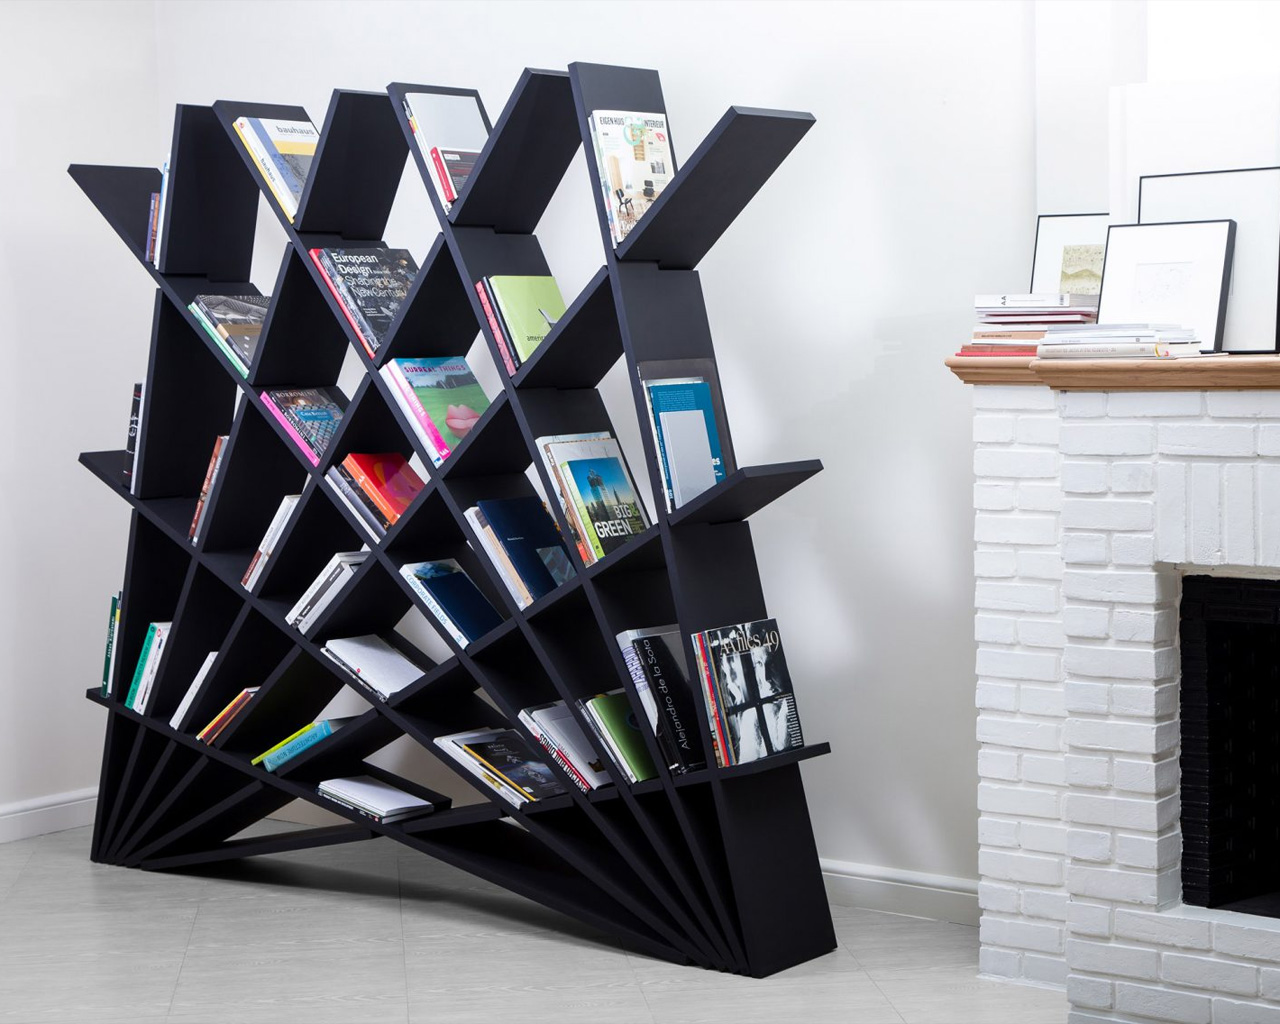 This geometrically fascinating bookshelf is the ultimate storage space for your prized books